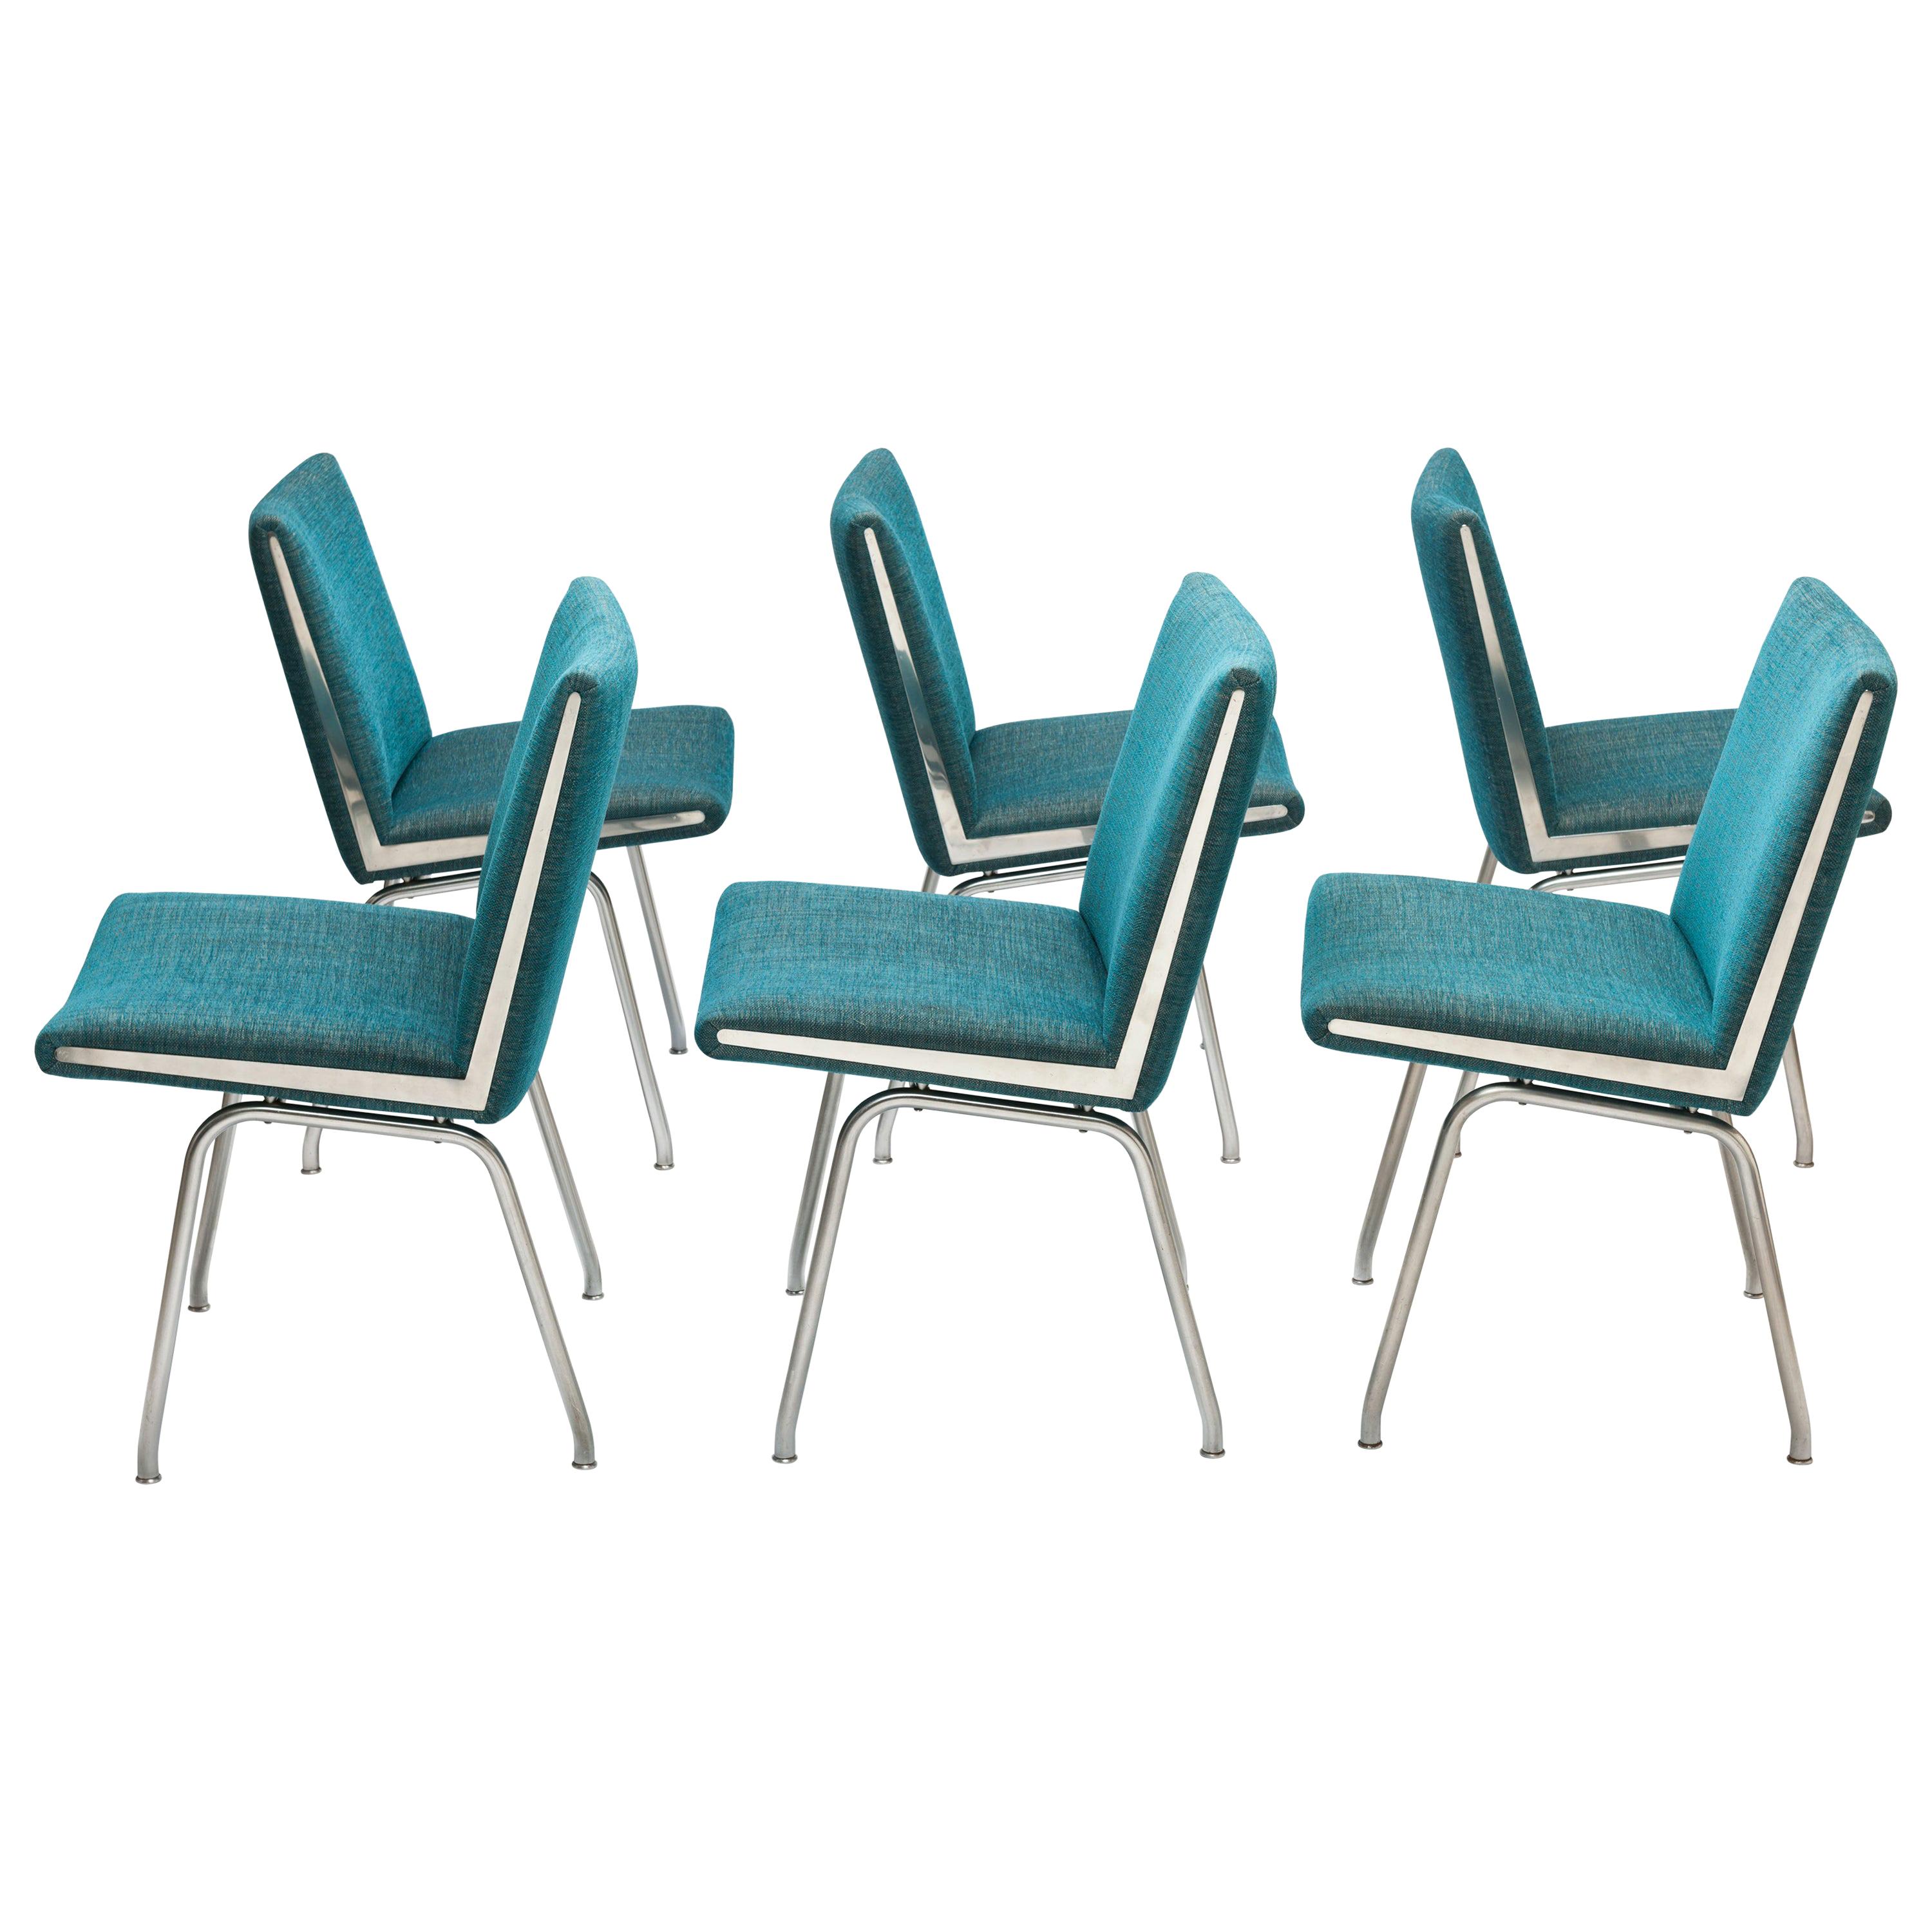 6 Hans J. Wegner Dining Chairs by A.P. Stolen, New Upholstery's